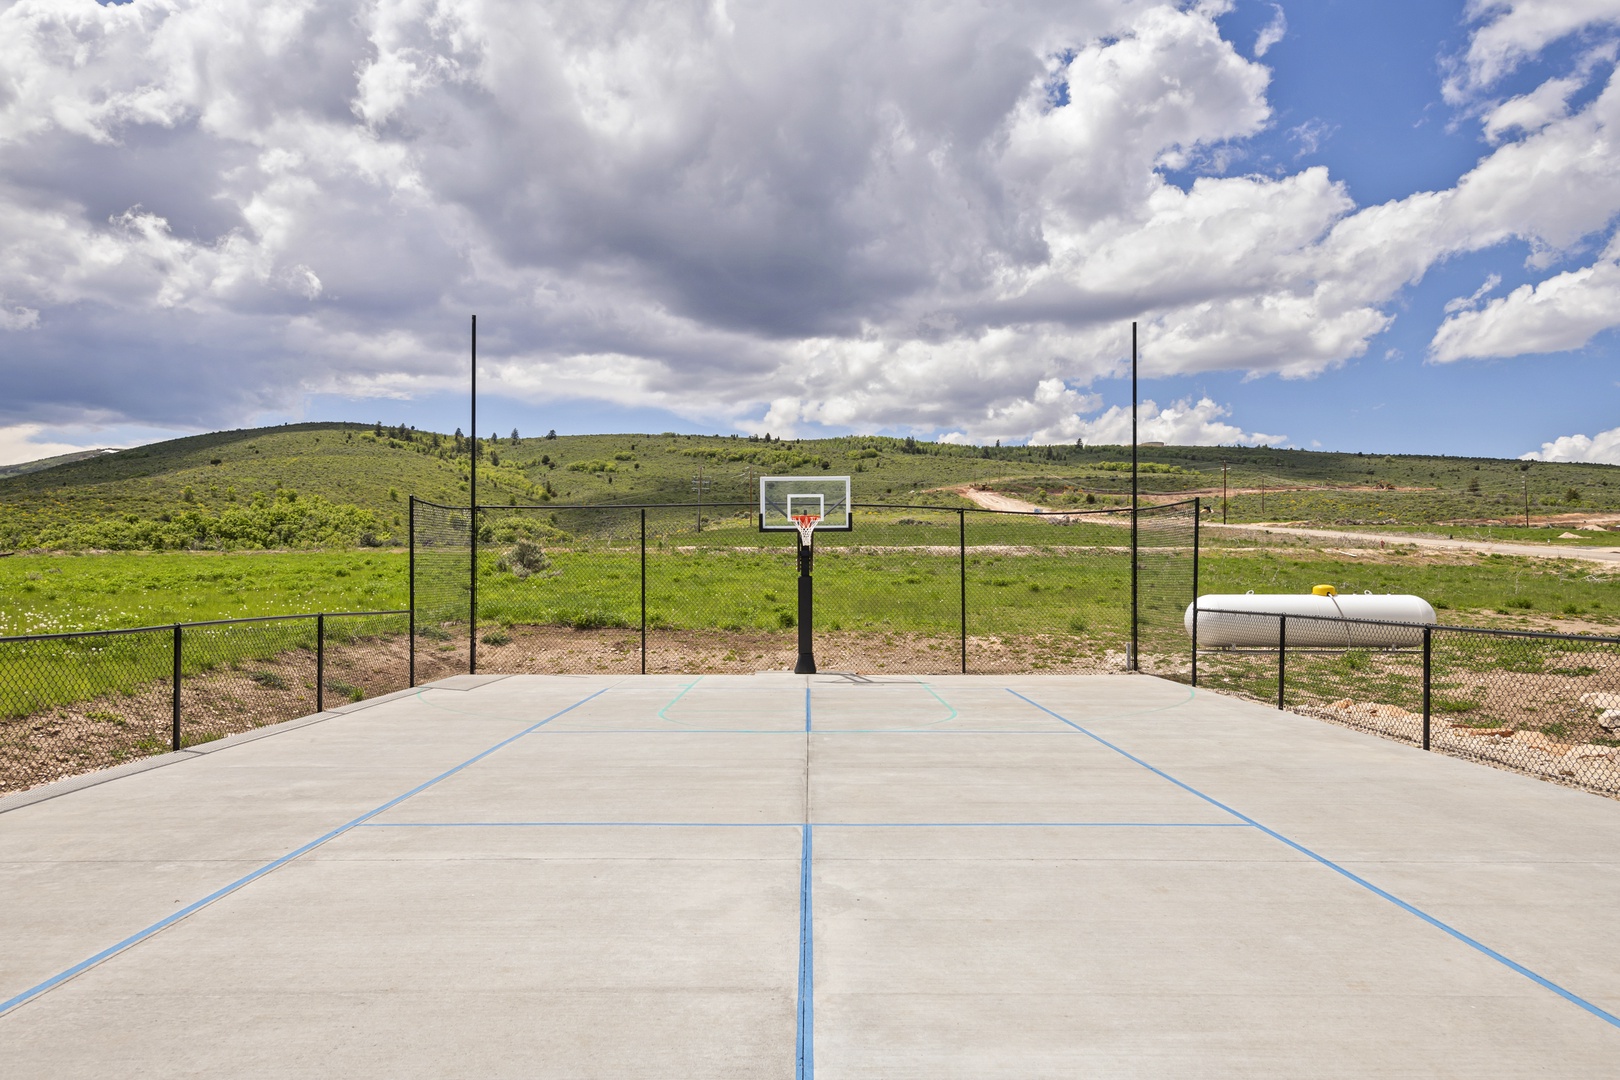 Persimmon Hill-Pickle ball court and basket ball court